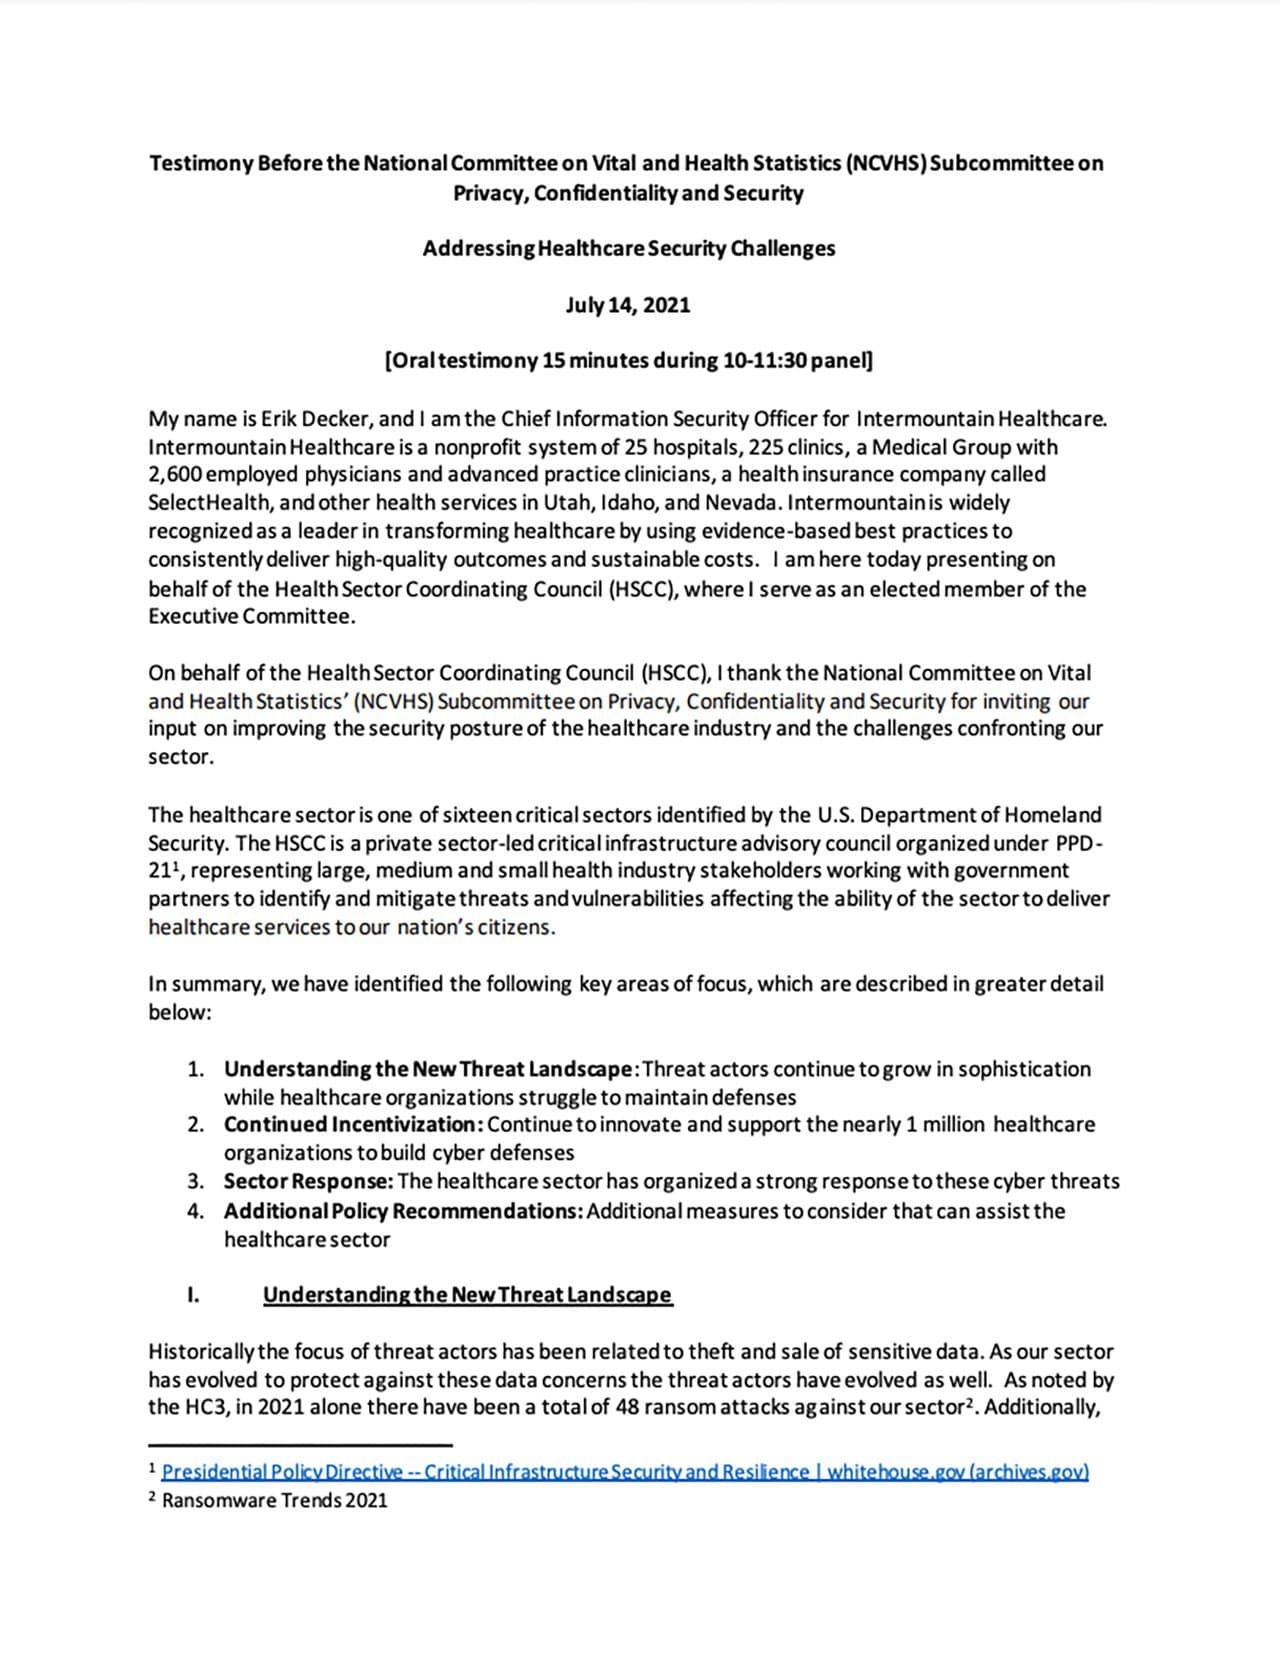 07/20/2021:  Testimony before HHS’ NCVHS Subcommittee Addressing Healthcare Security Challenges